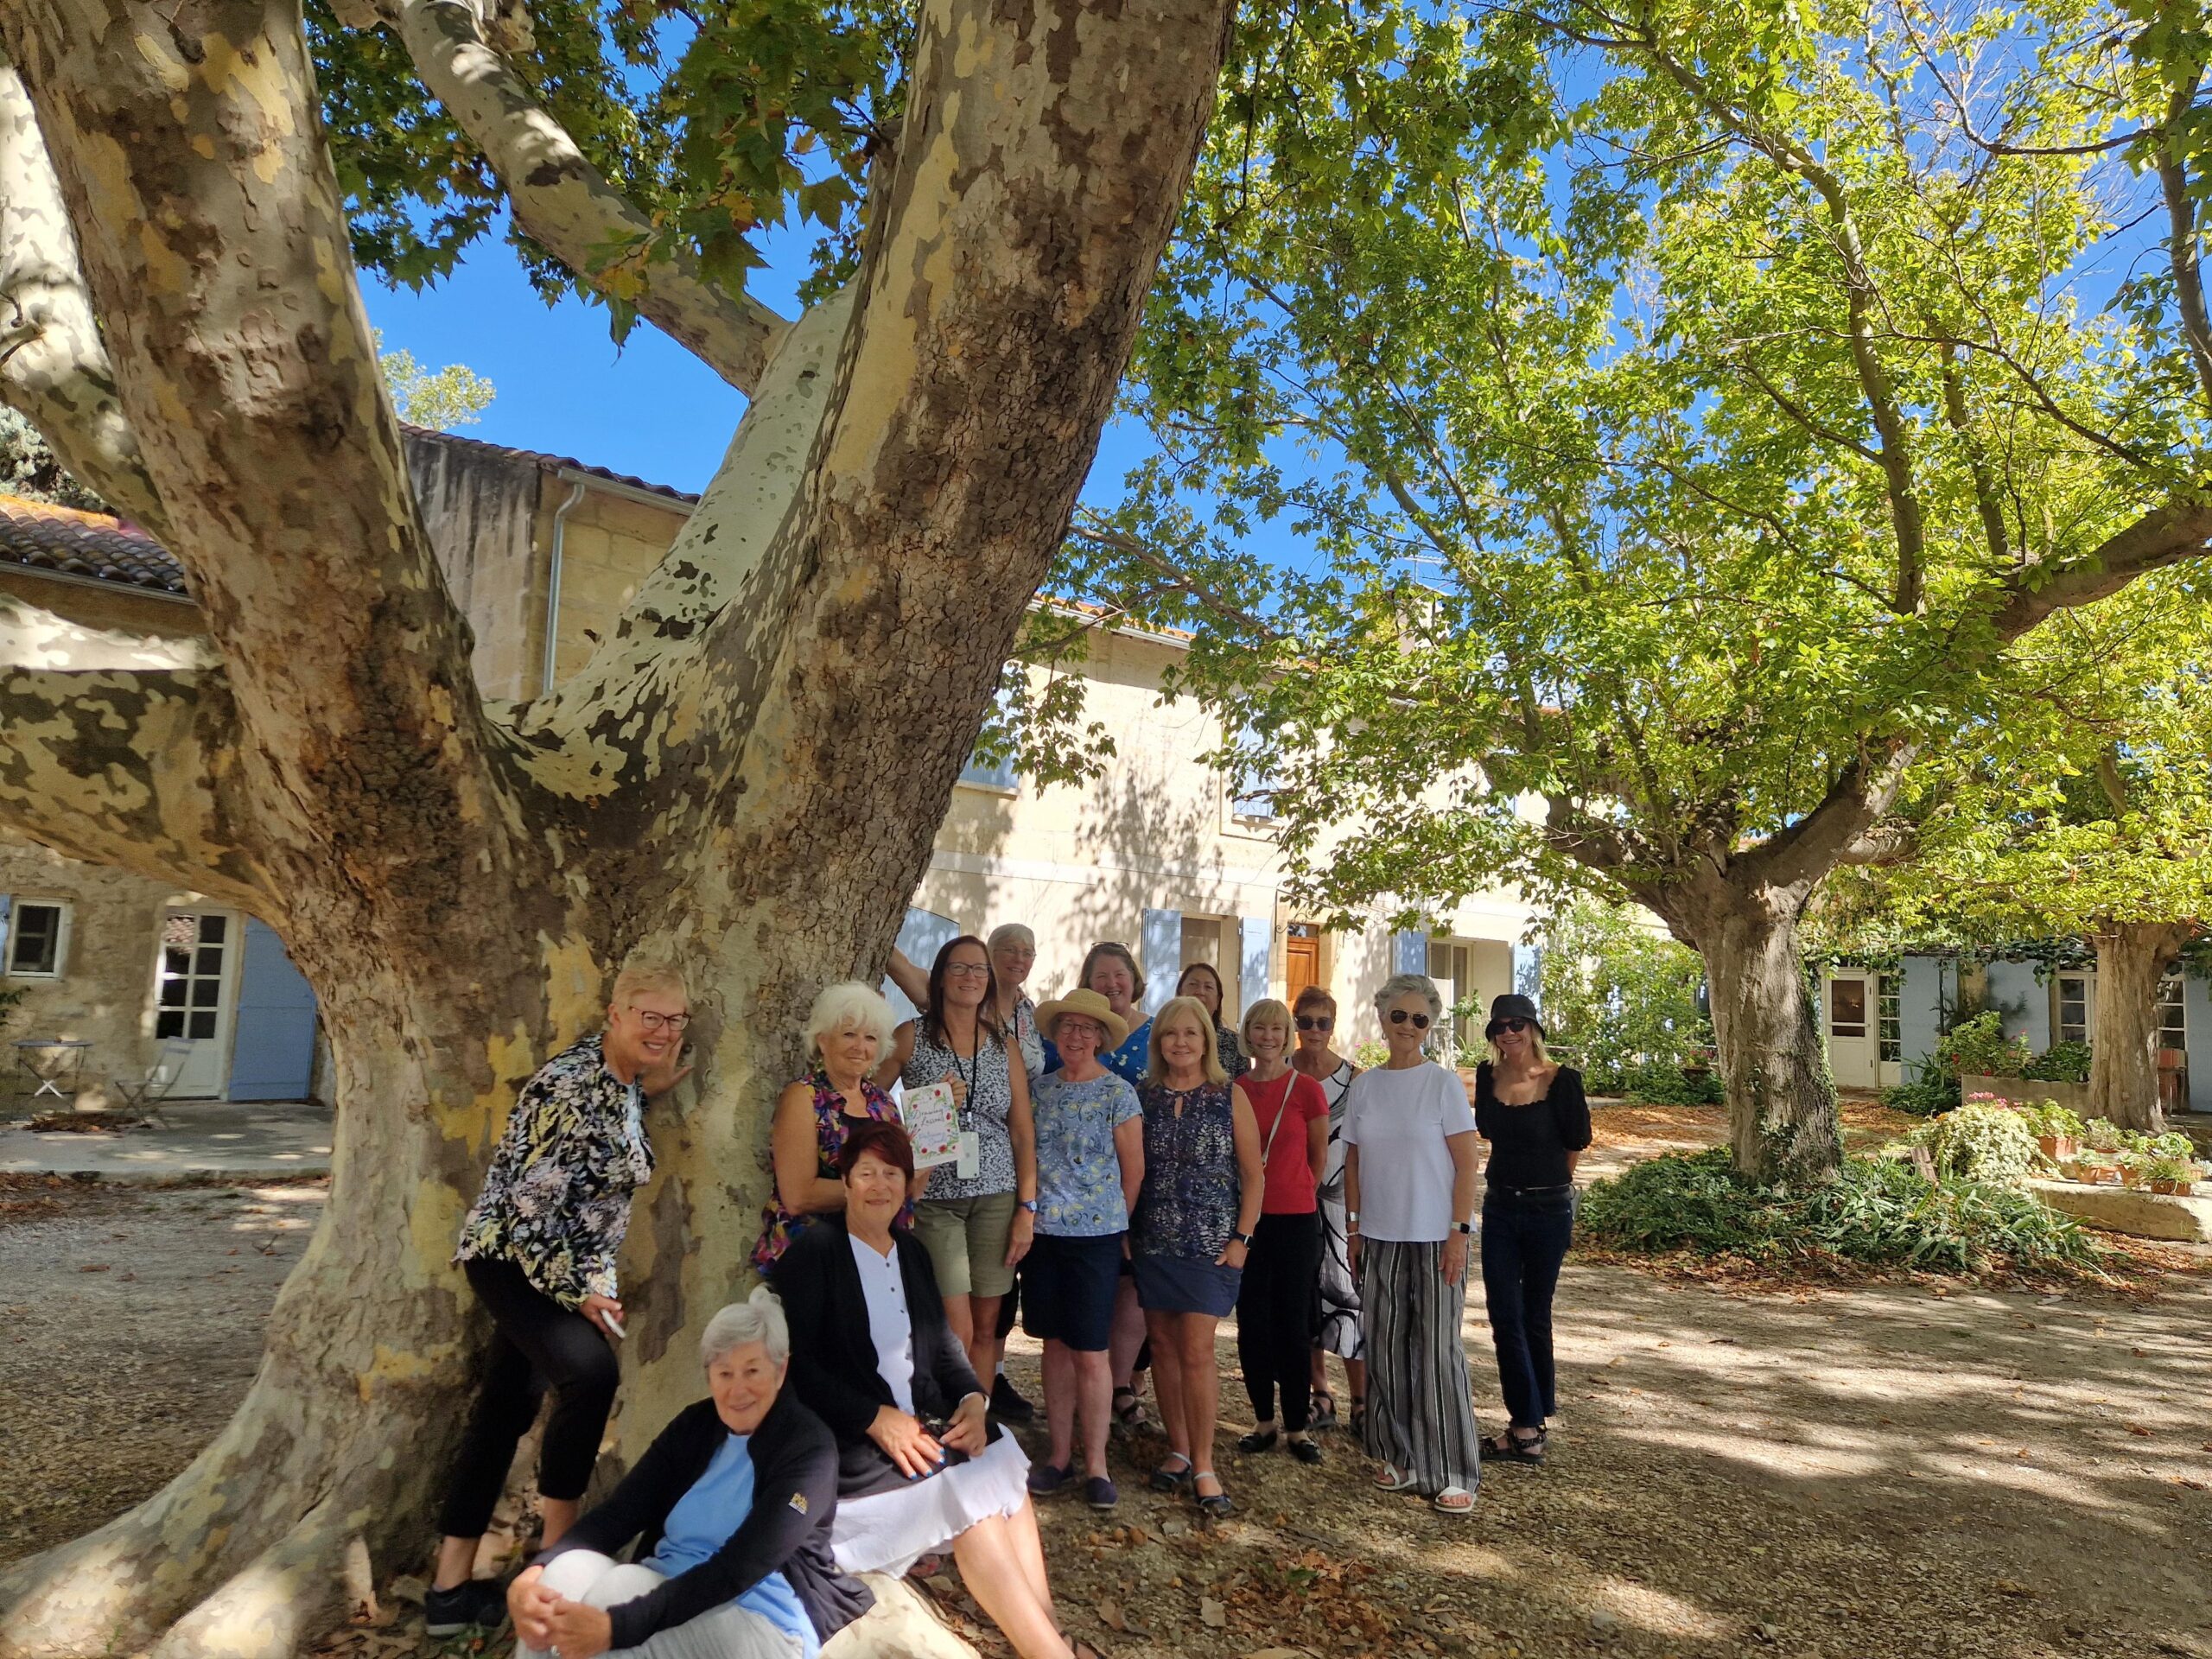 An Absolutely Southern France tour group poses for a picture on their South of France womens tour.